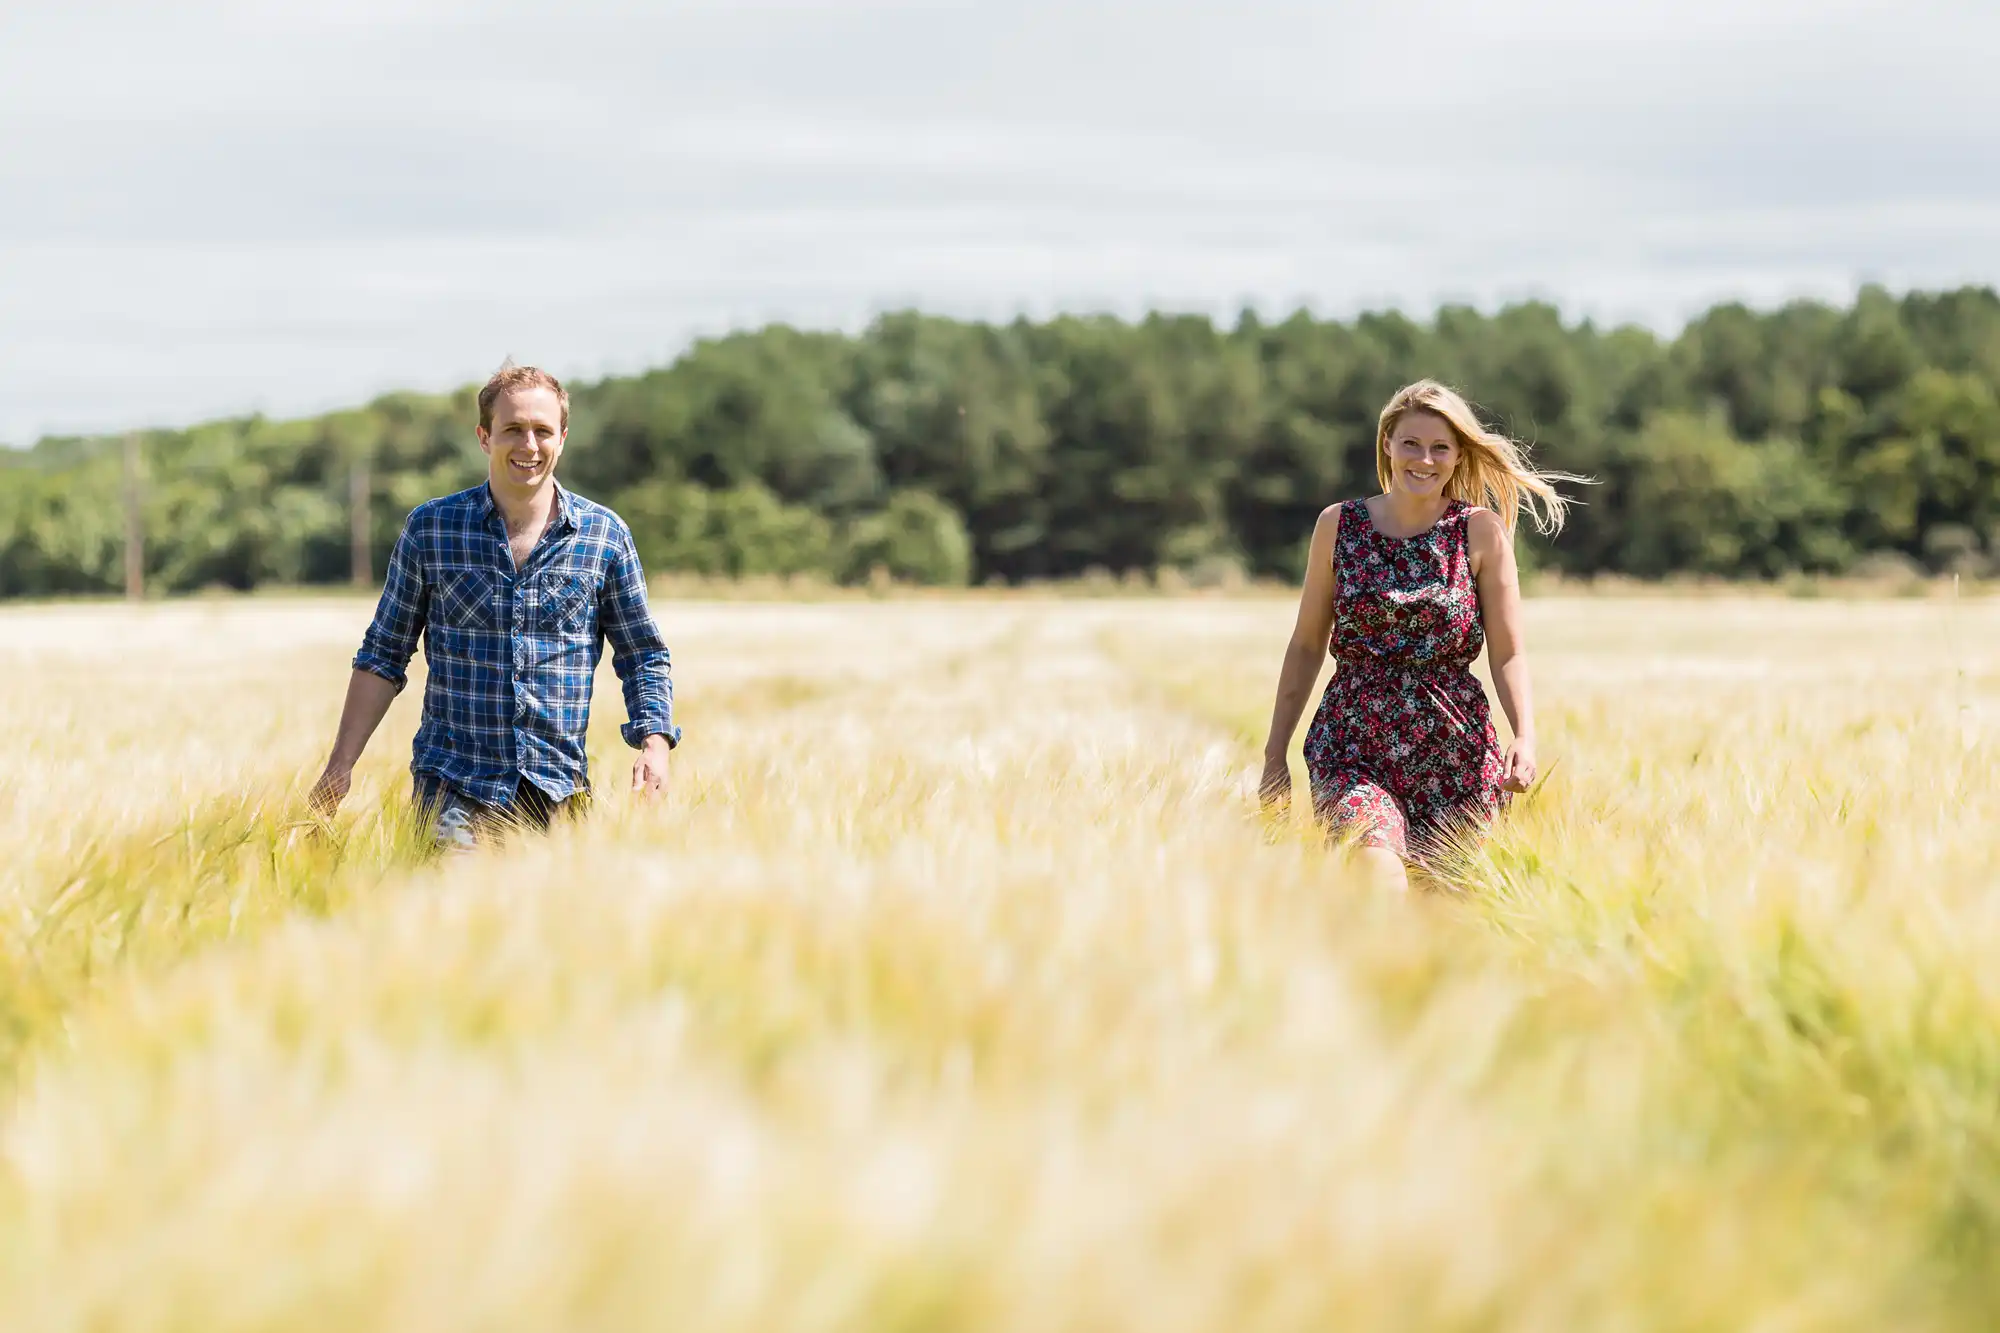 A man and a woman smiling and walking through a sunny wheat field, the man in a blue plaid shirt and the woman in a floral dress.